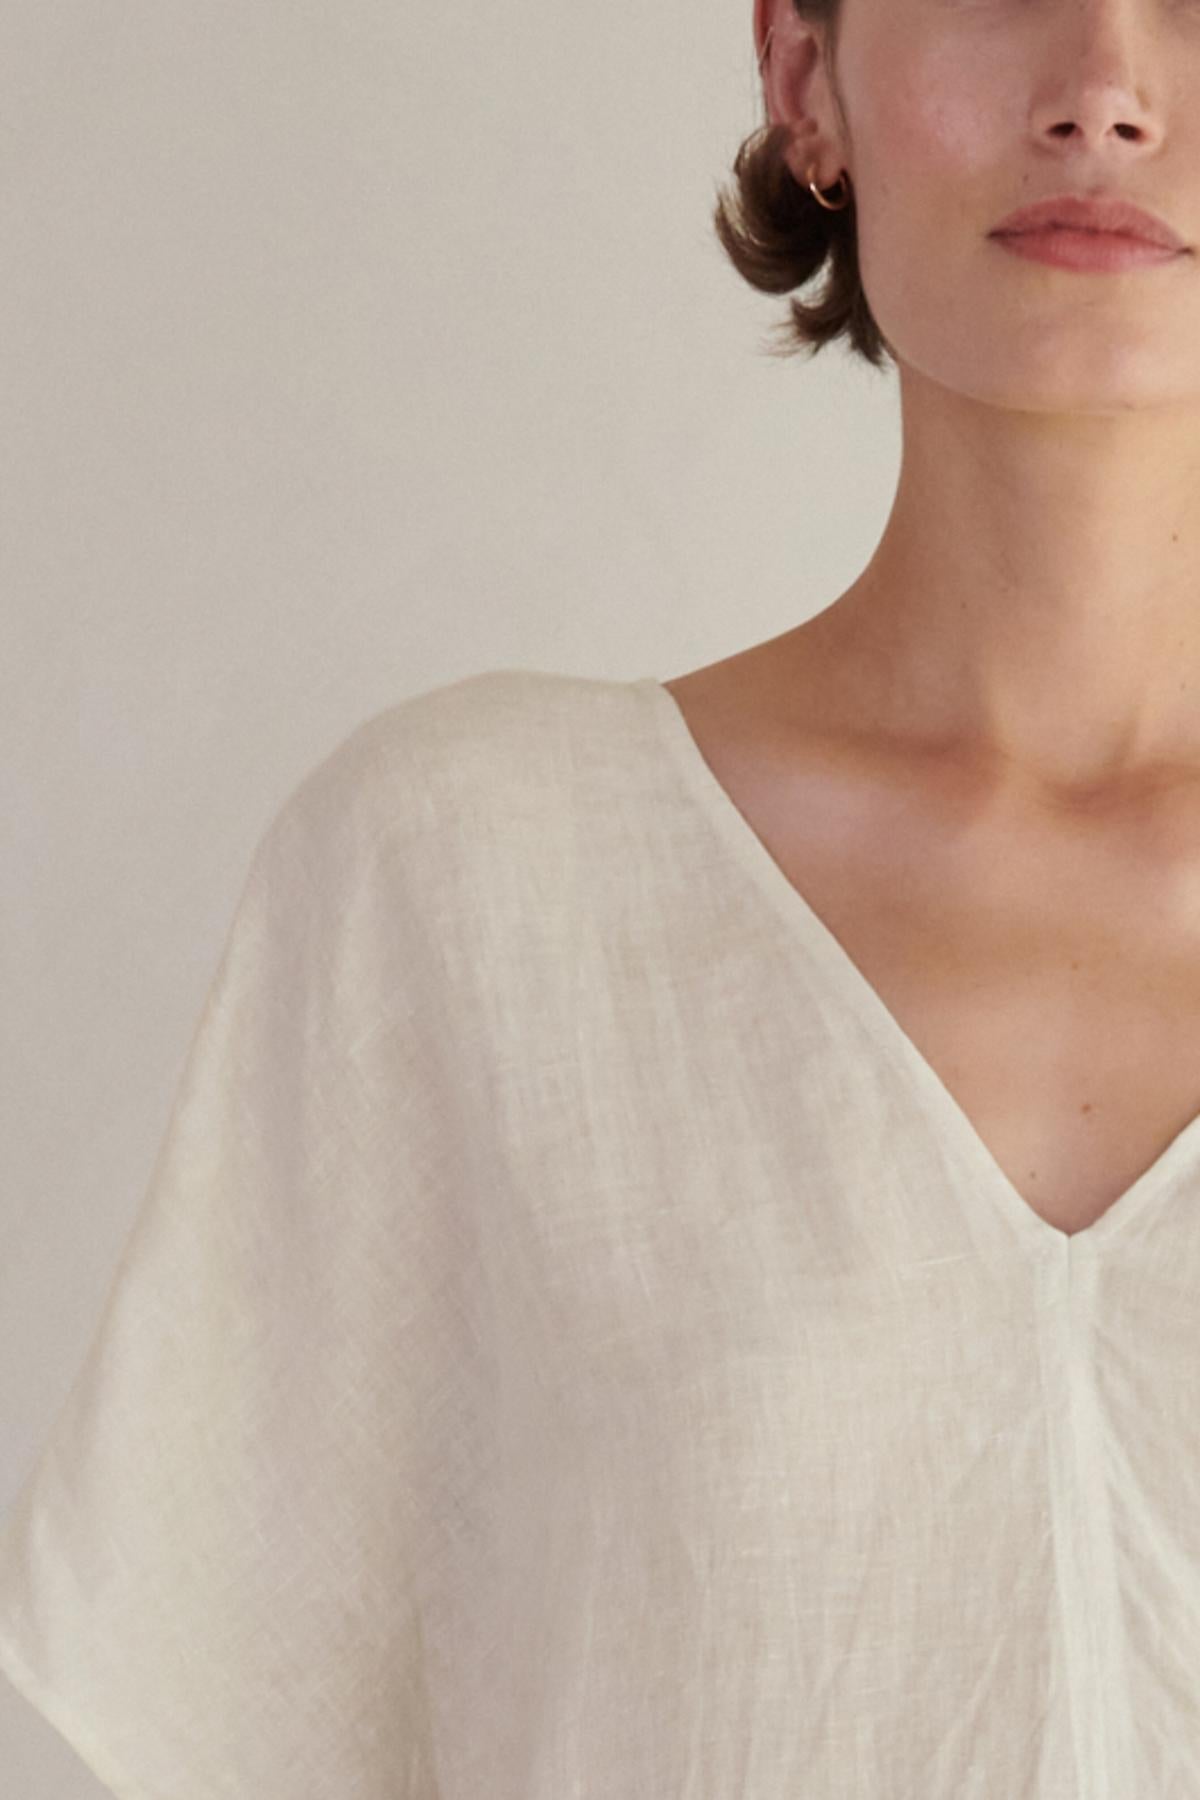 Close-up of a woman in a Montana Linen Dress from Velvet by Jenny Graham, focusing on the V neckline and shoulder area, with a soft-focus background.-26293194981569